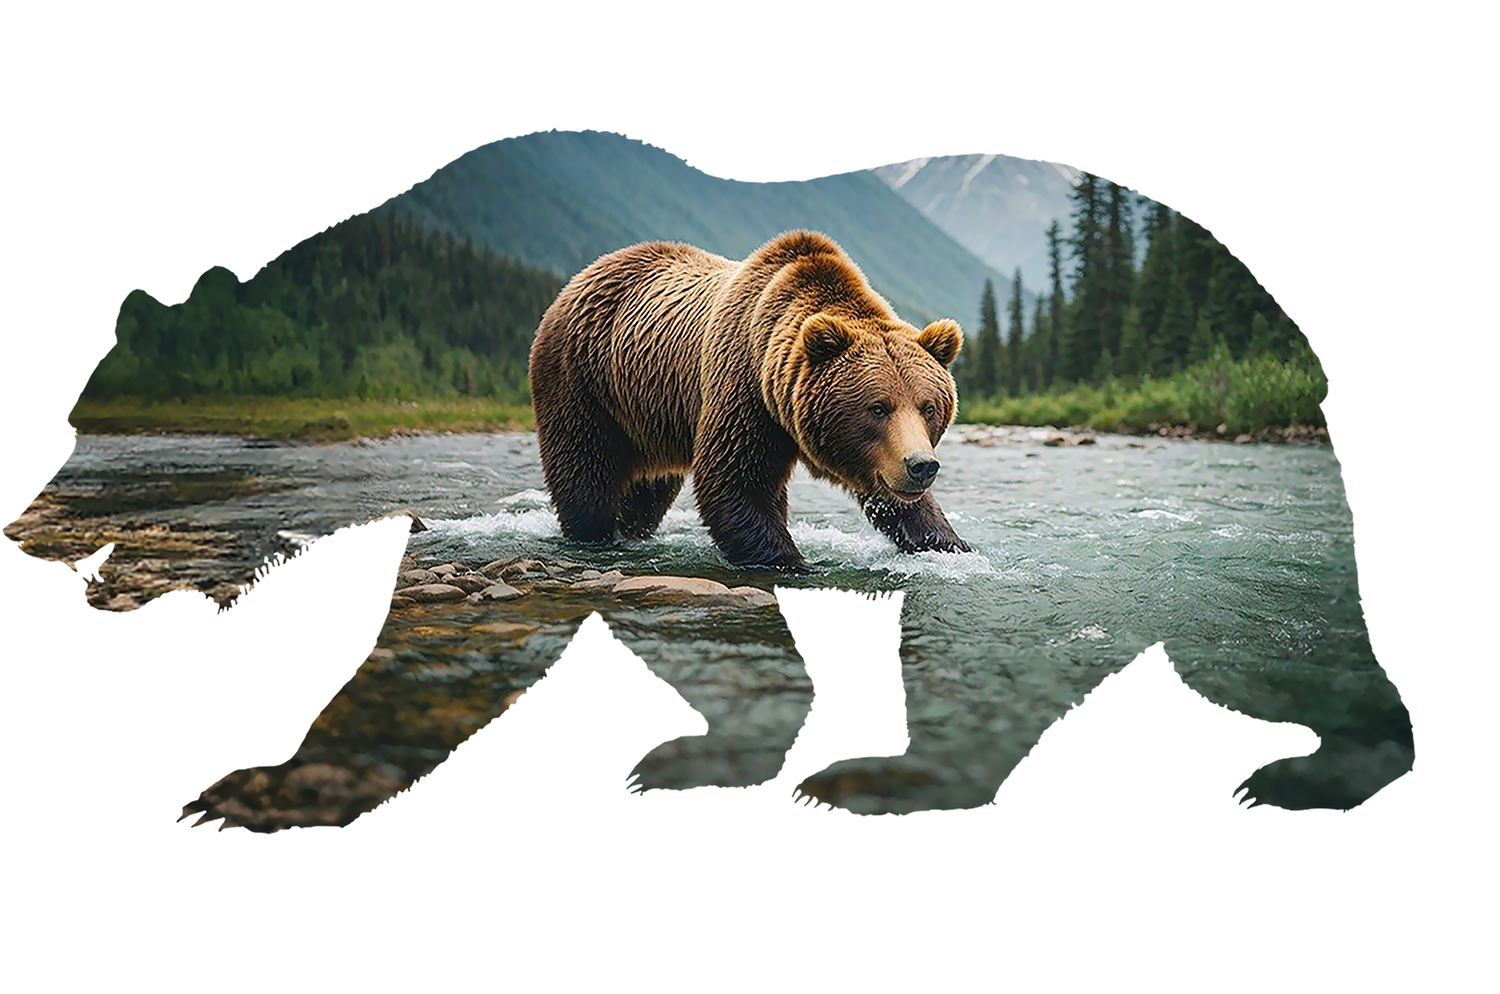 grizzly bear in a river in the wilderness